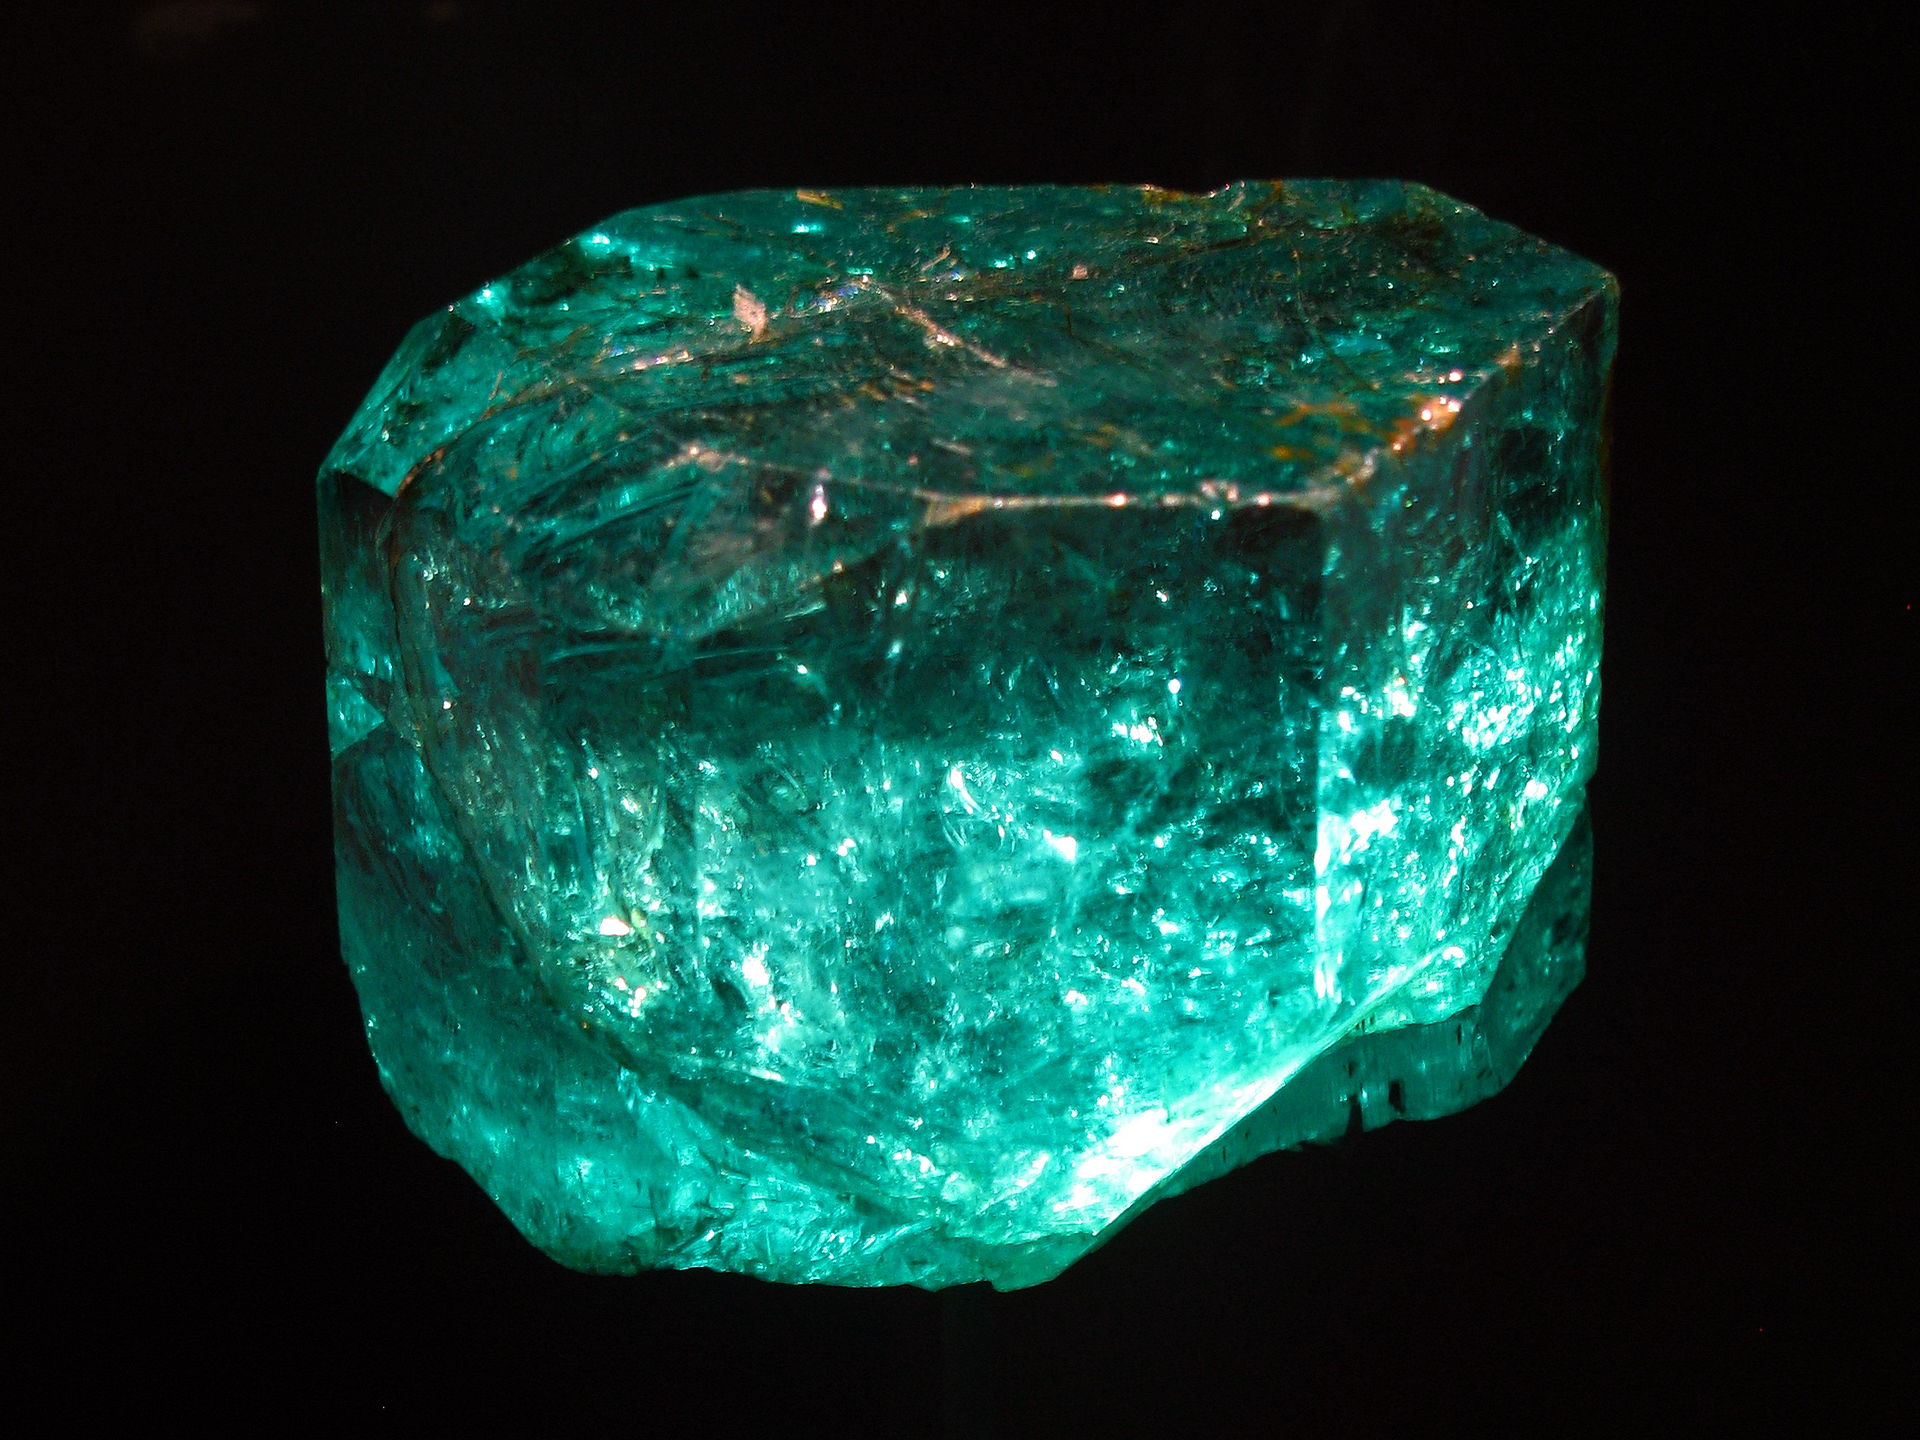 The Symbolism of the Emerald